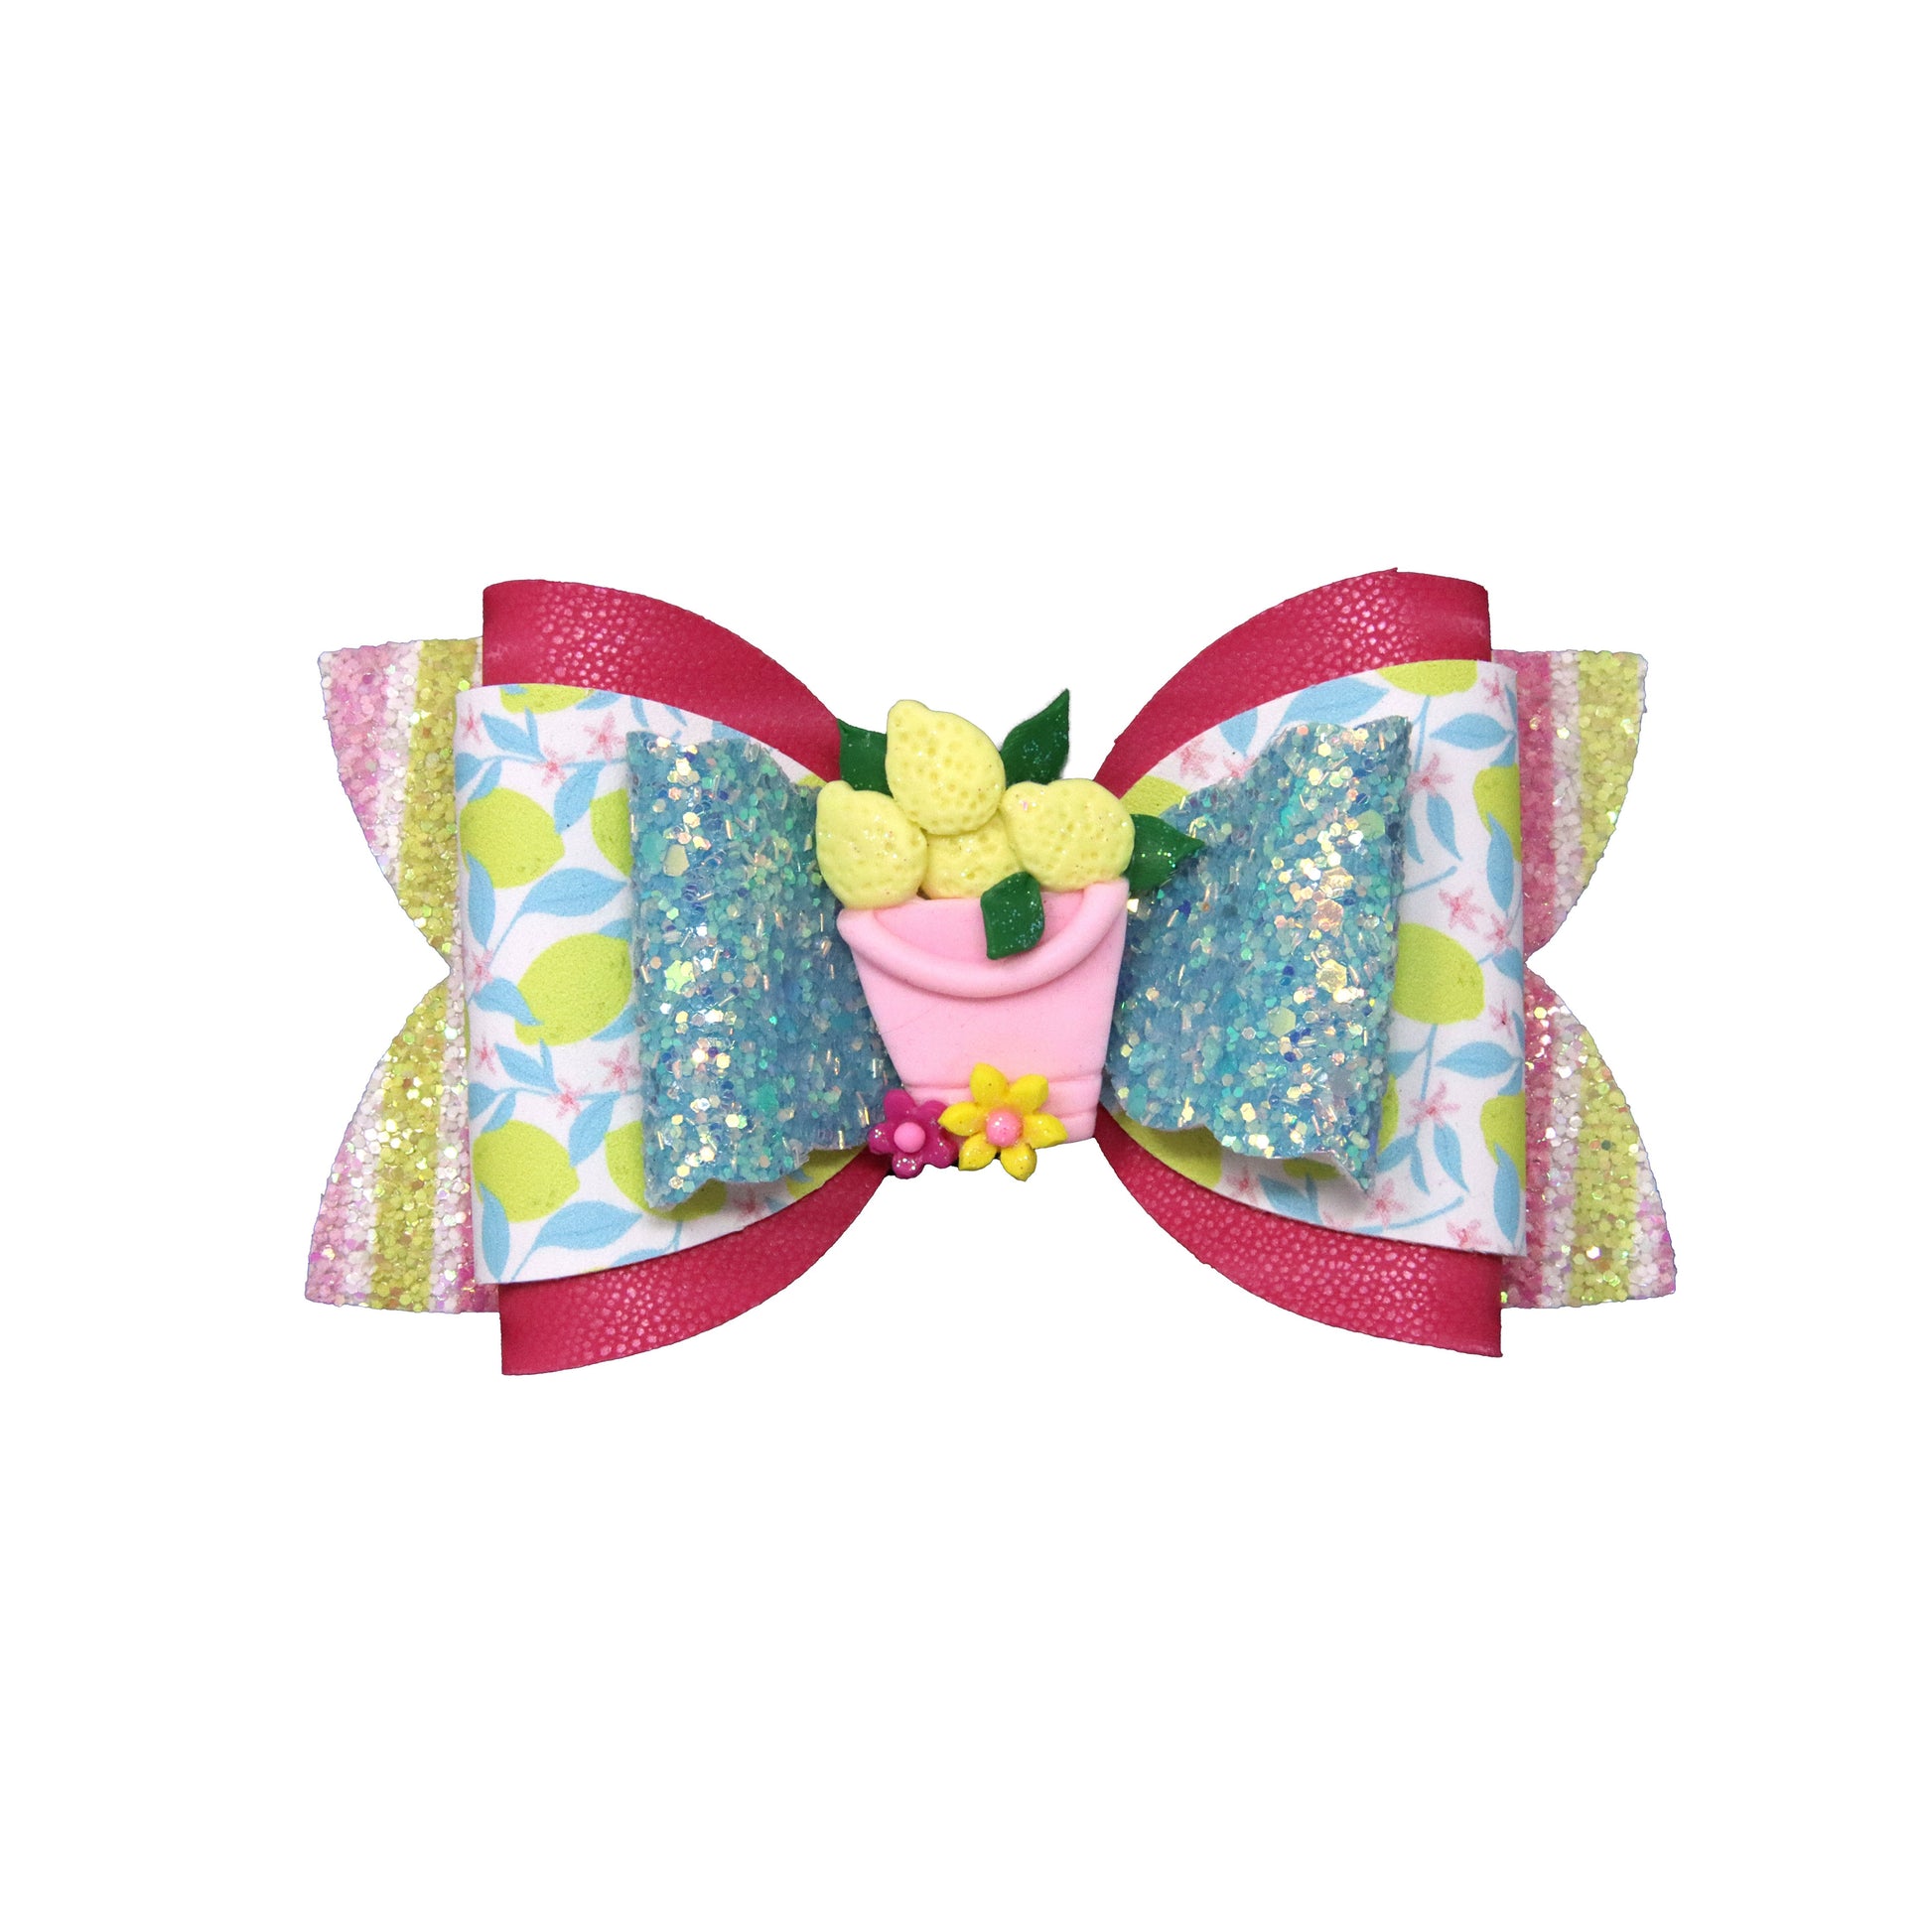 Lemonade Dressed-up Double Diva Bow 5" with Pail of Lemons Clay